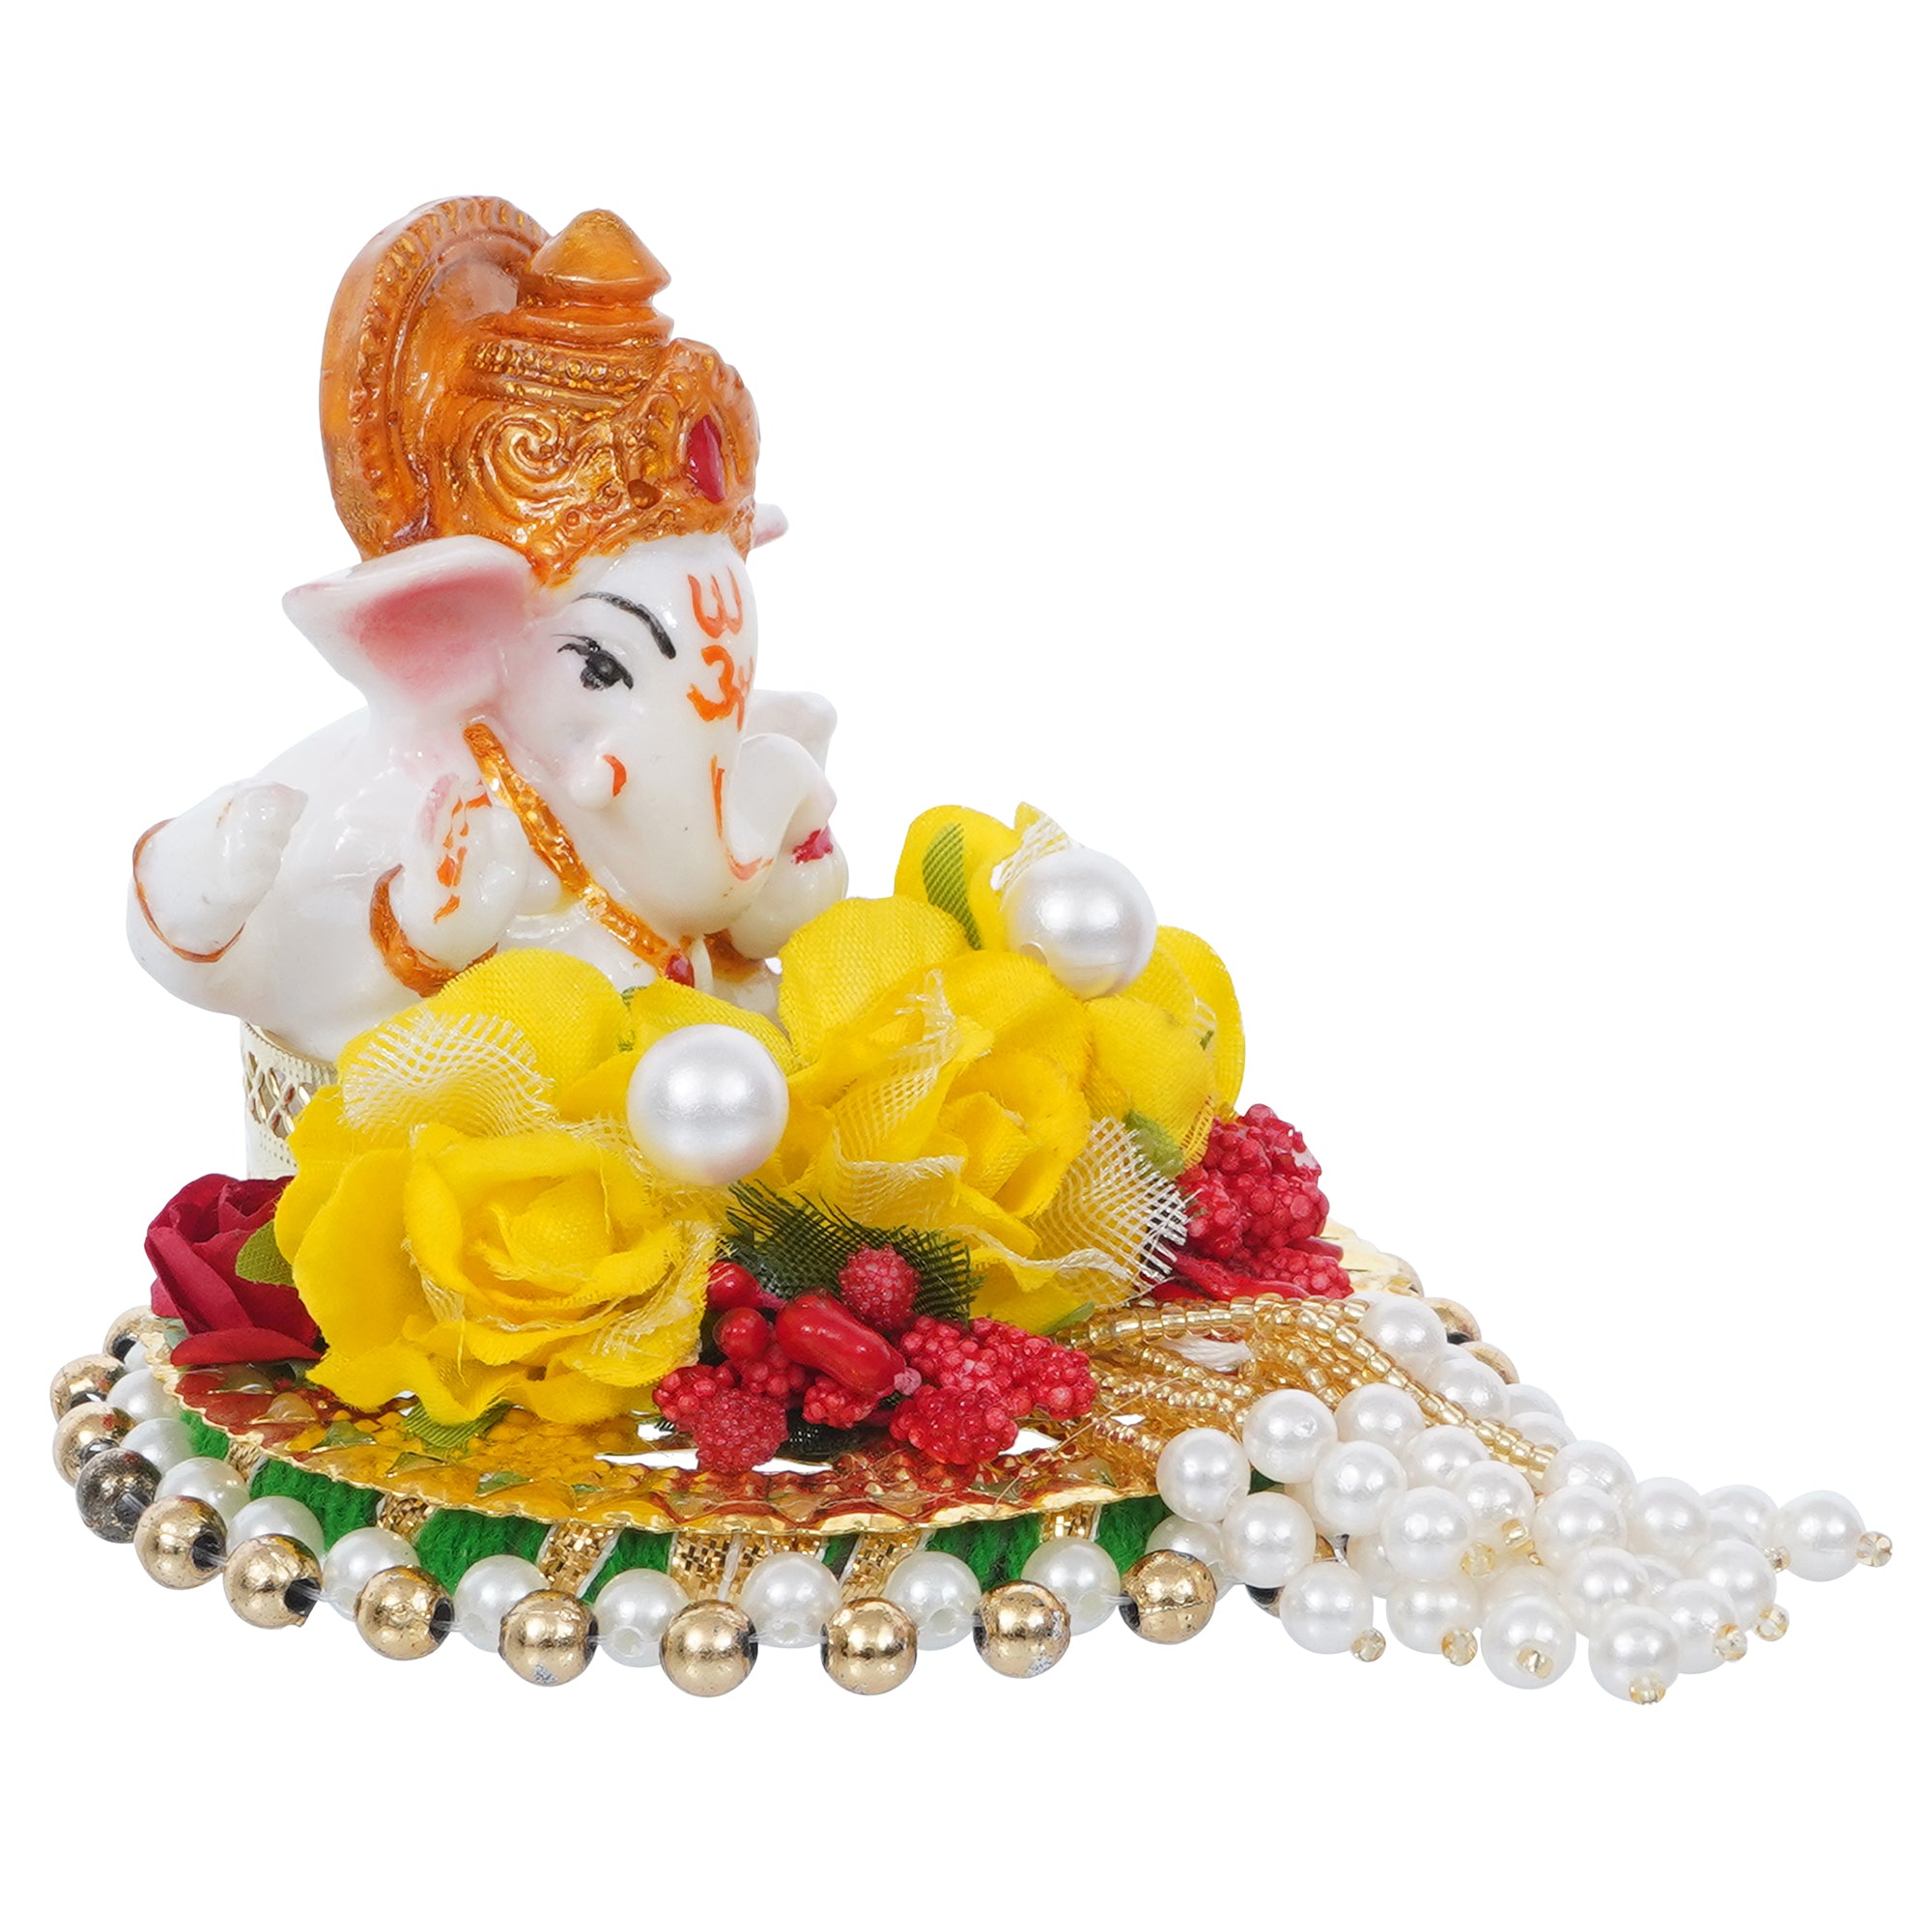 Lord Ganesha Idol on Decorative Handcrafted Plate with Colorful Flowers 2